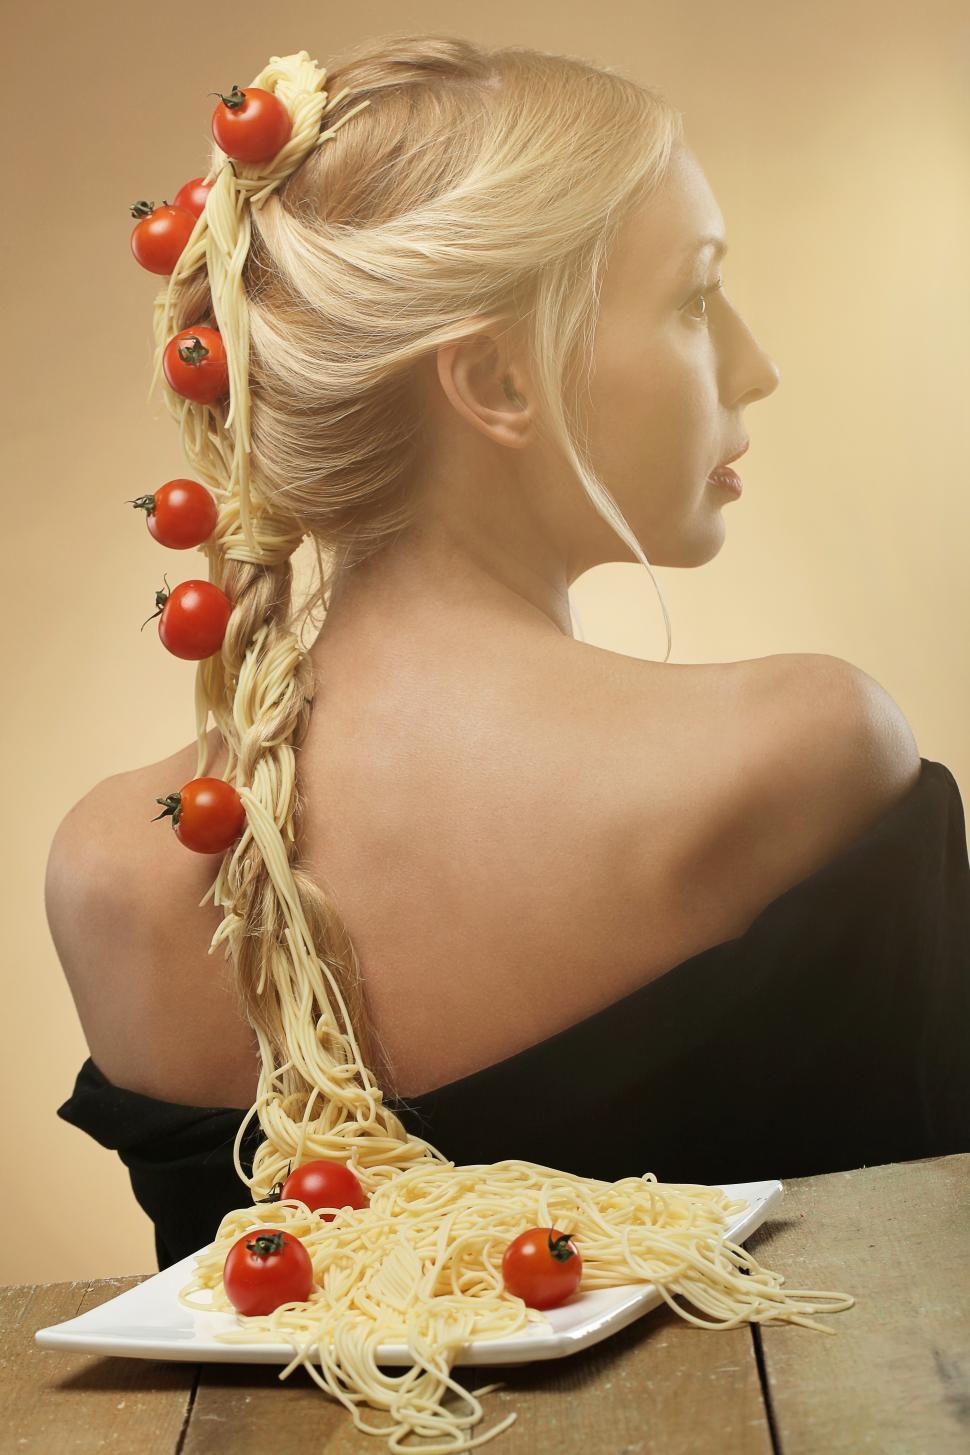 Free Image of Woman with pasta braid down her back. 